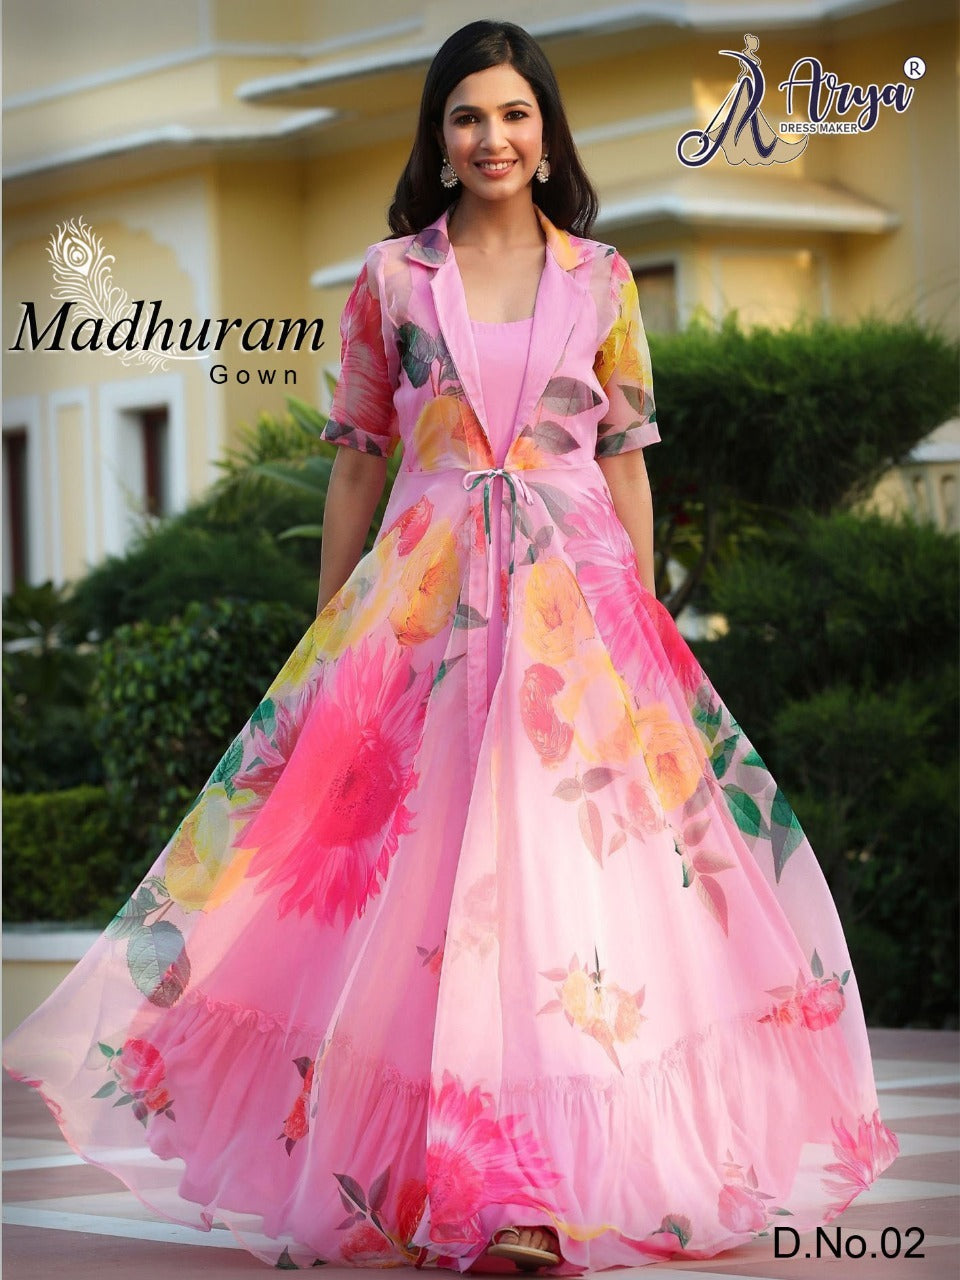 PARTY WEAR MADHURAM GOWN Anant Tex Exports Private Limited